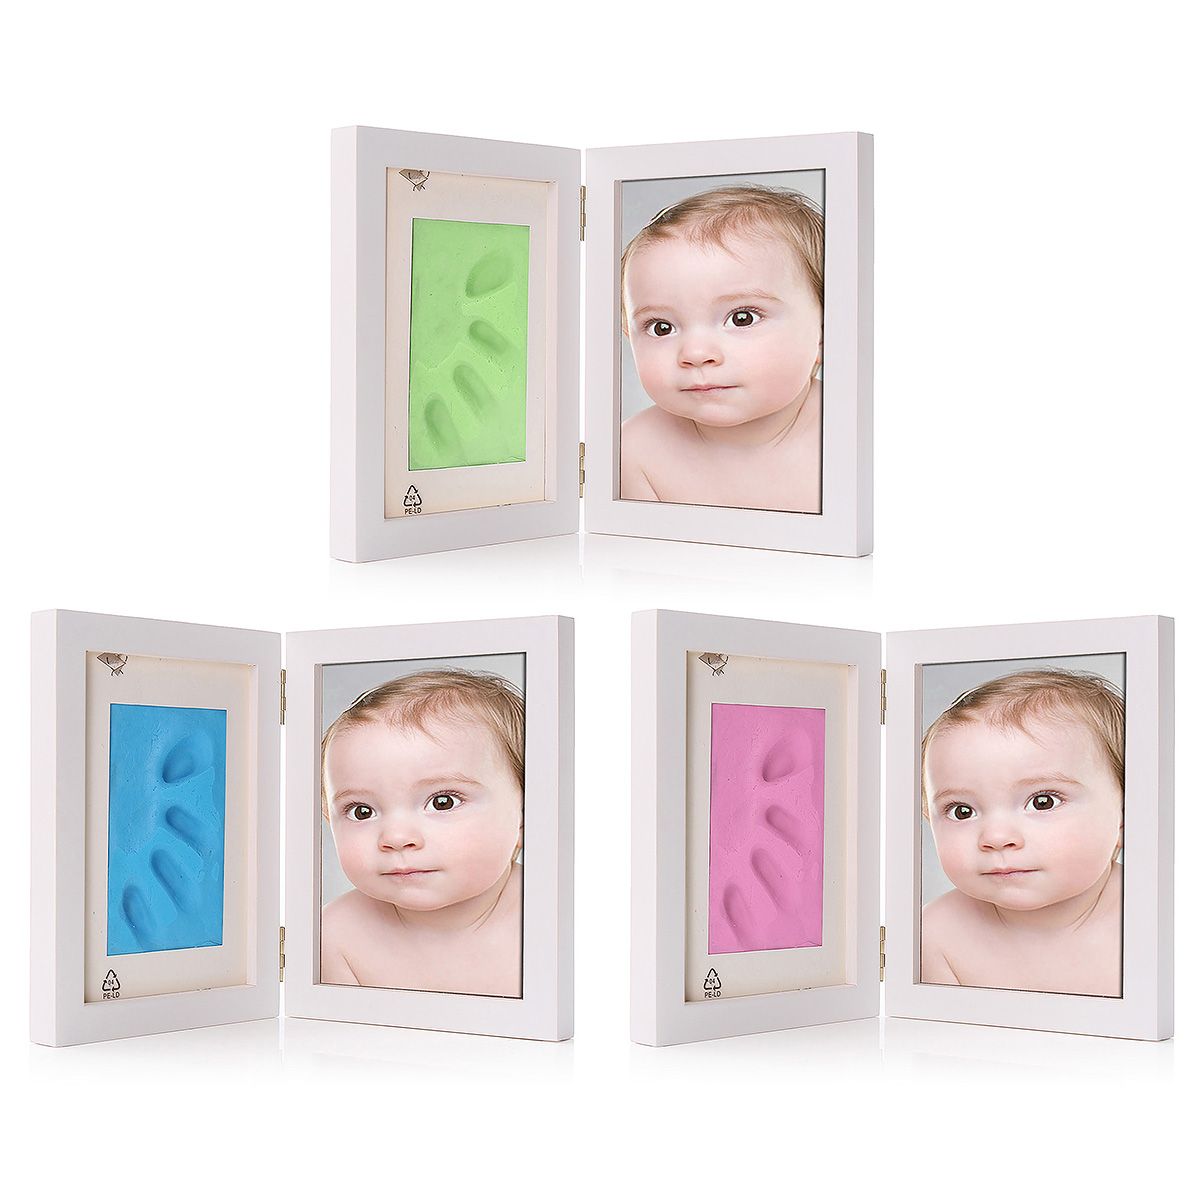 7-Inch-New-Born-Baby-Hnad-Foot-Print-Clay-Wood-Photo-Frame-Stand-Home-Decor-1632990